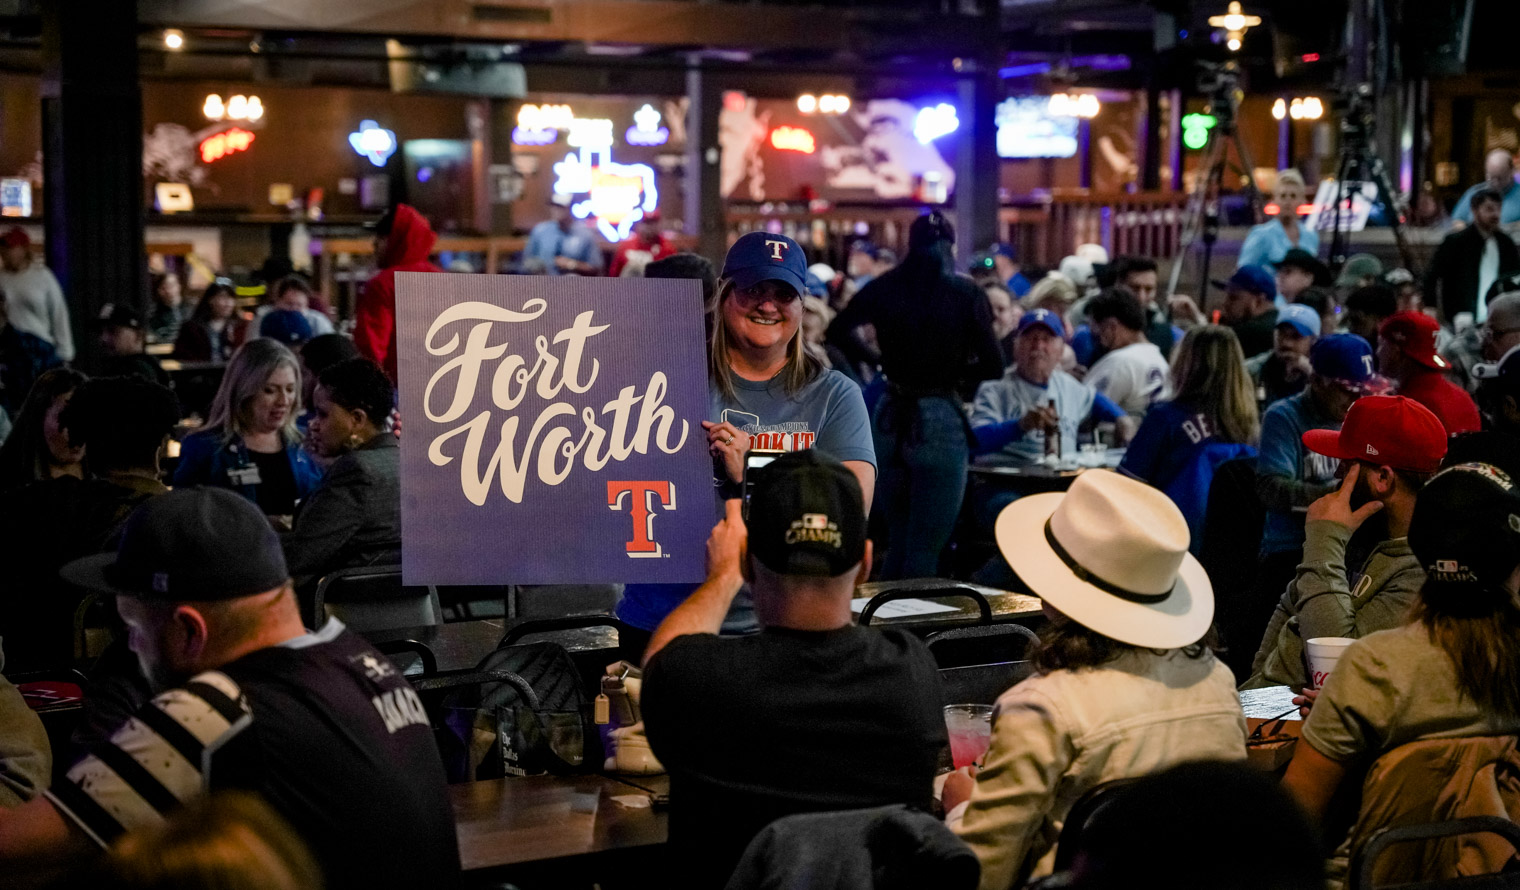 A woman posing with a sign that says "Fort Worth"